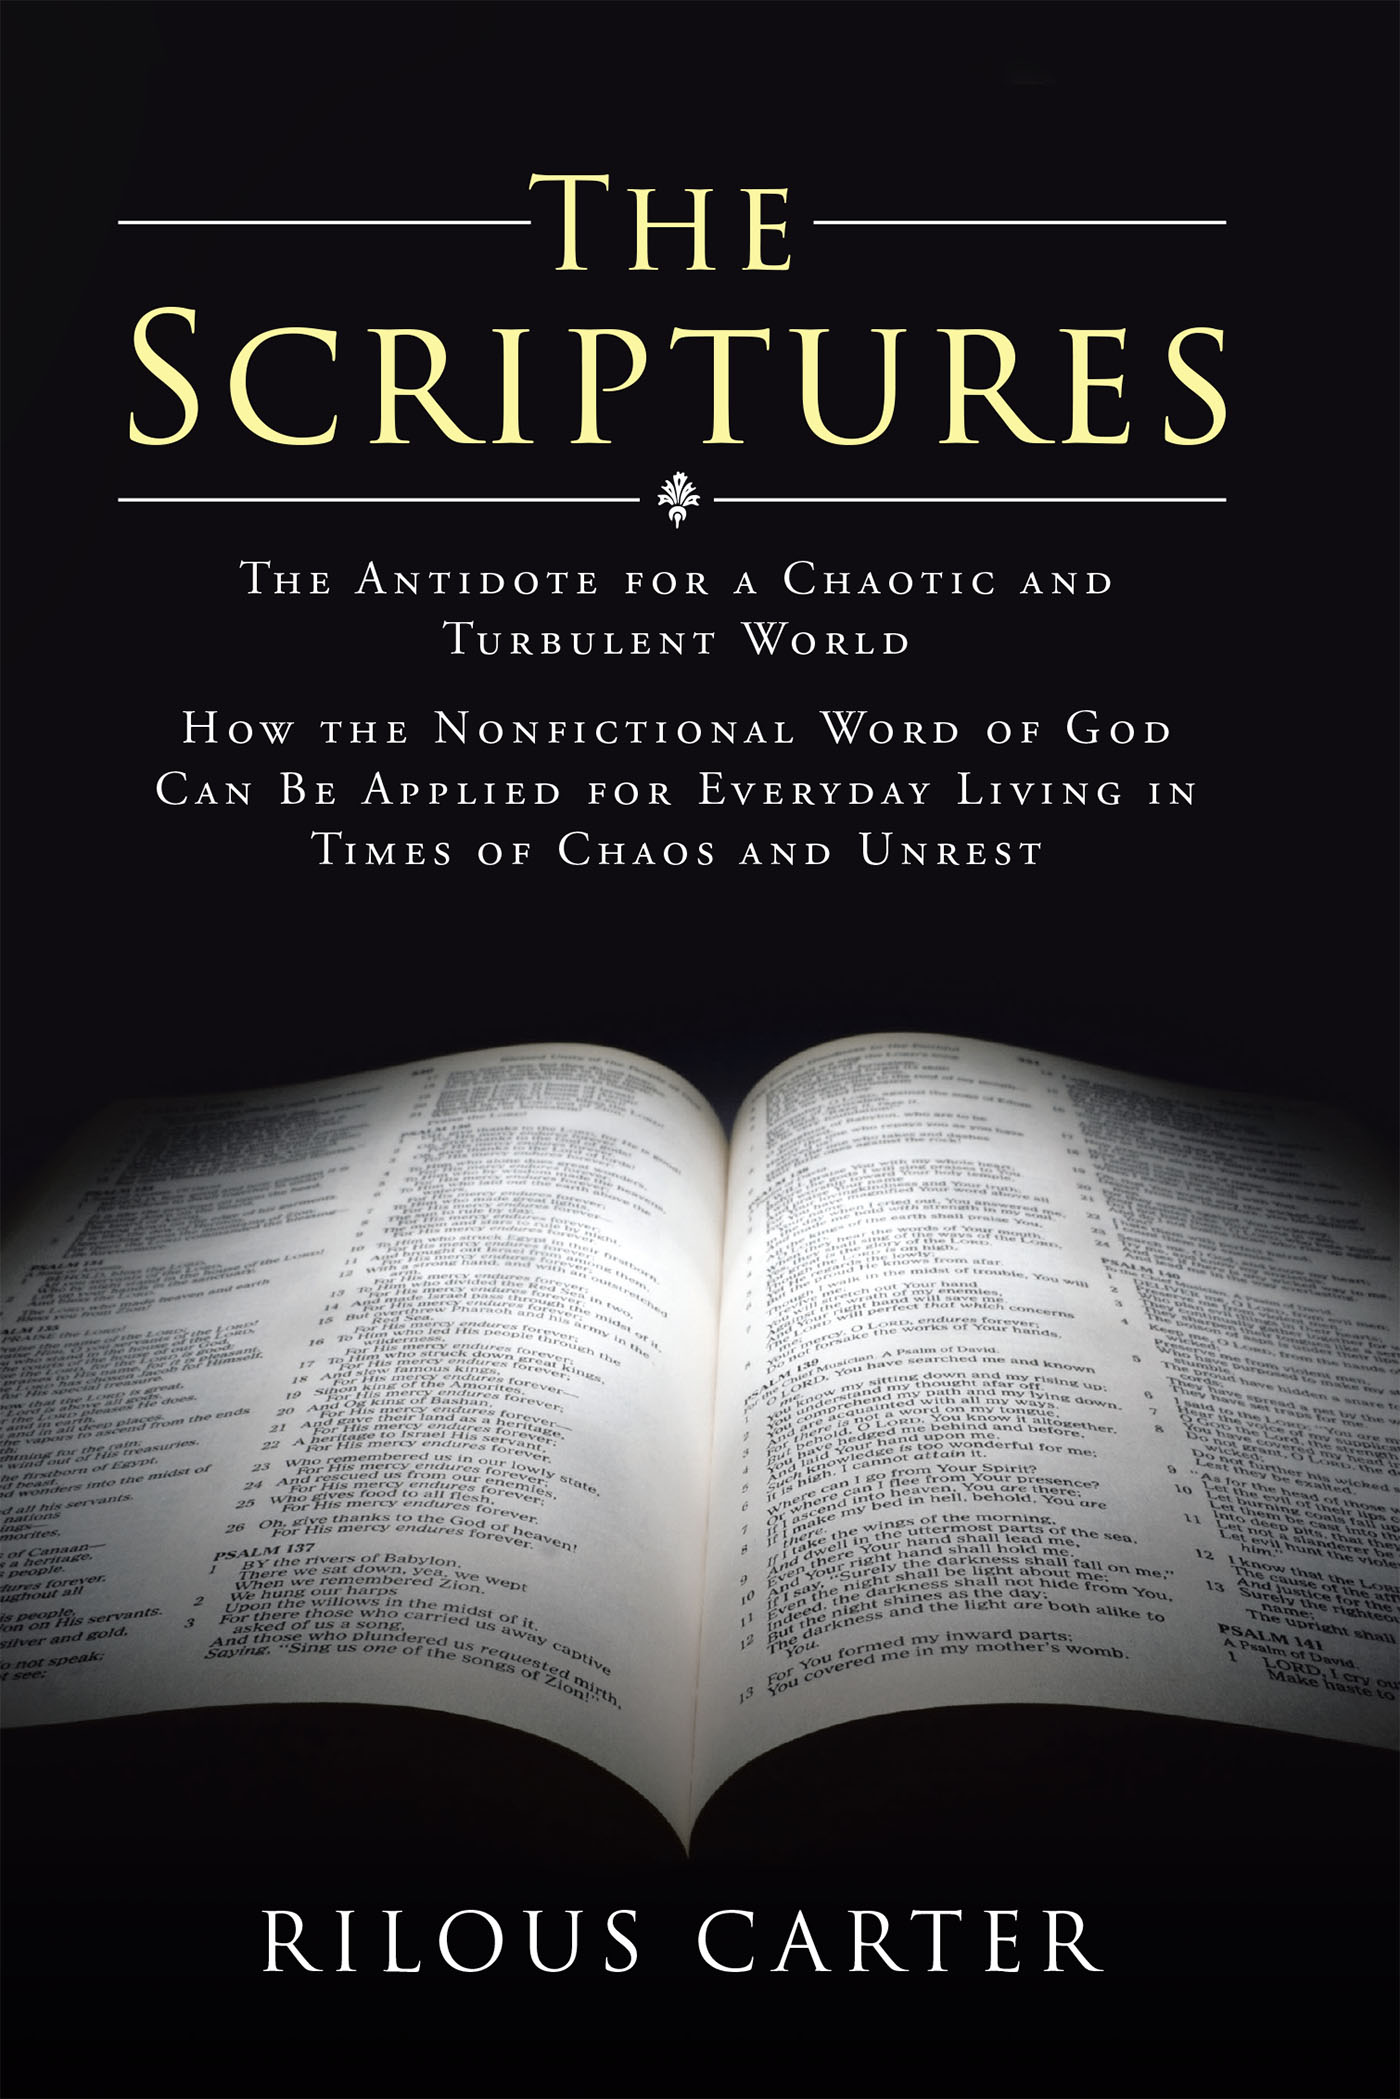 Rilous Carter’s Newly Released "The Scriptures" is a Thought-Provoking Discussion of How to Apply God’s Word to Our Modern World